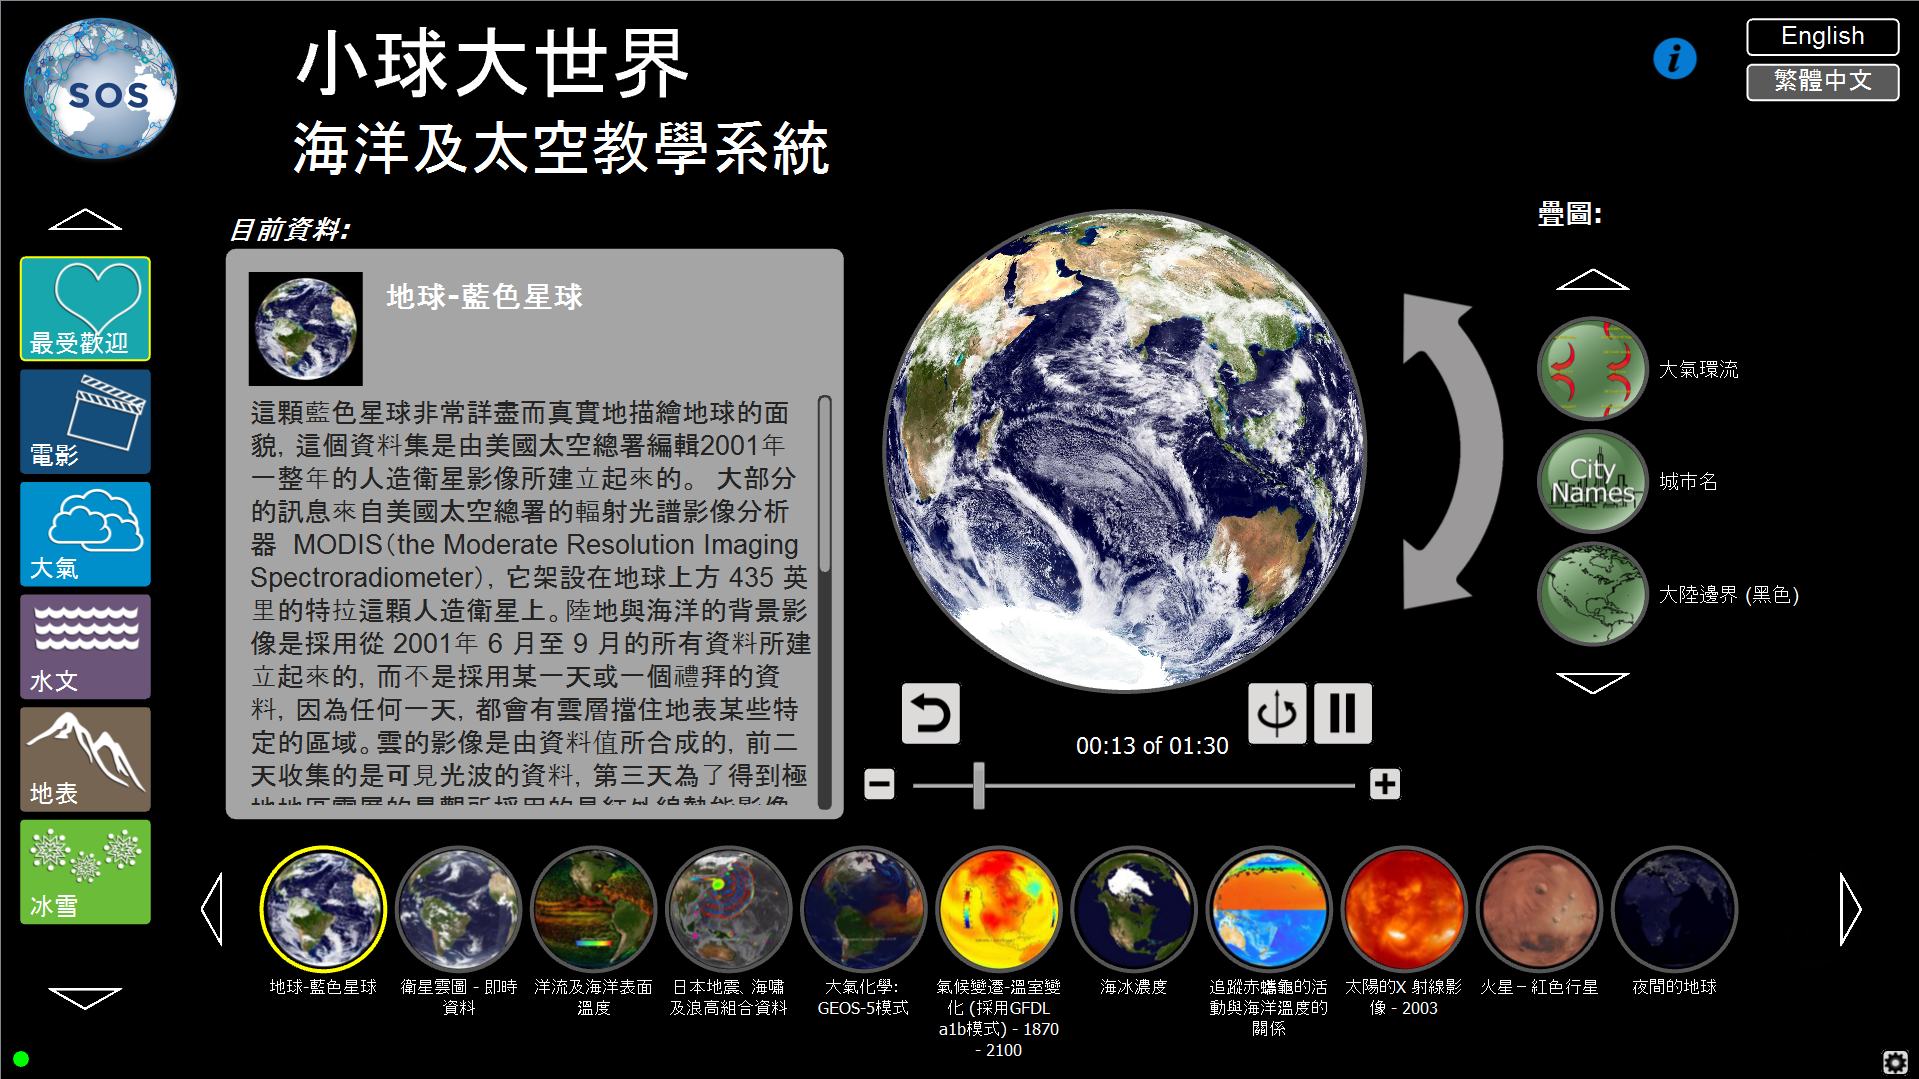 A screenshot of the Public Kiosk UI. All of the text is traditional Chinese